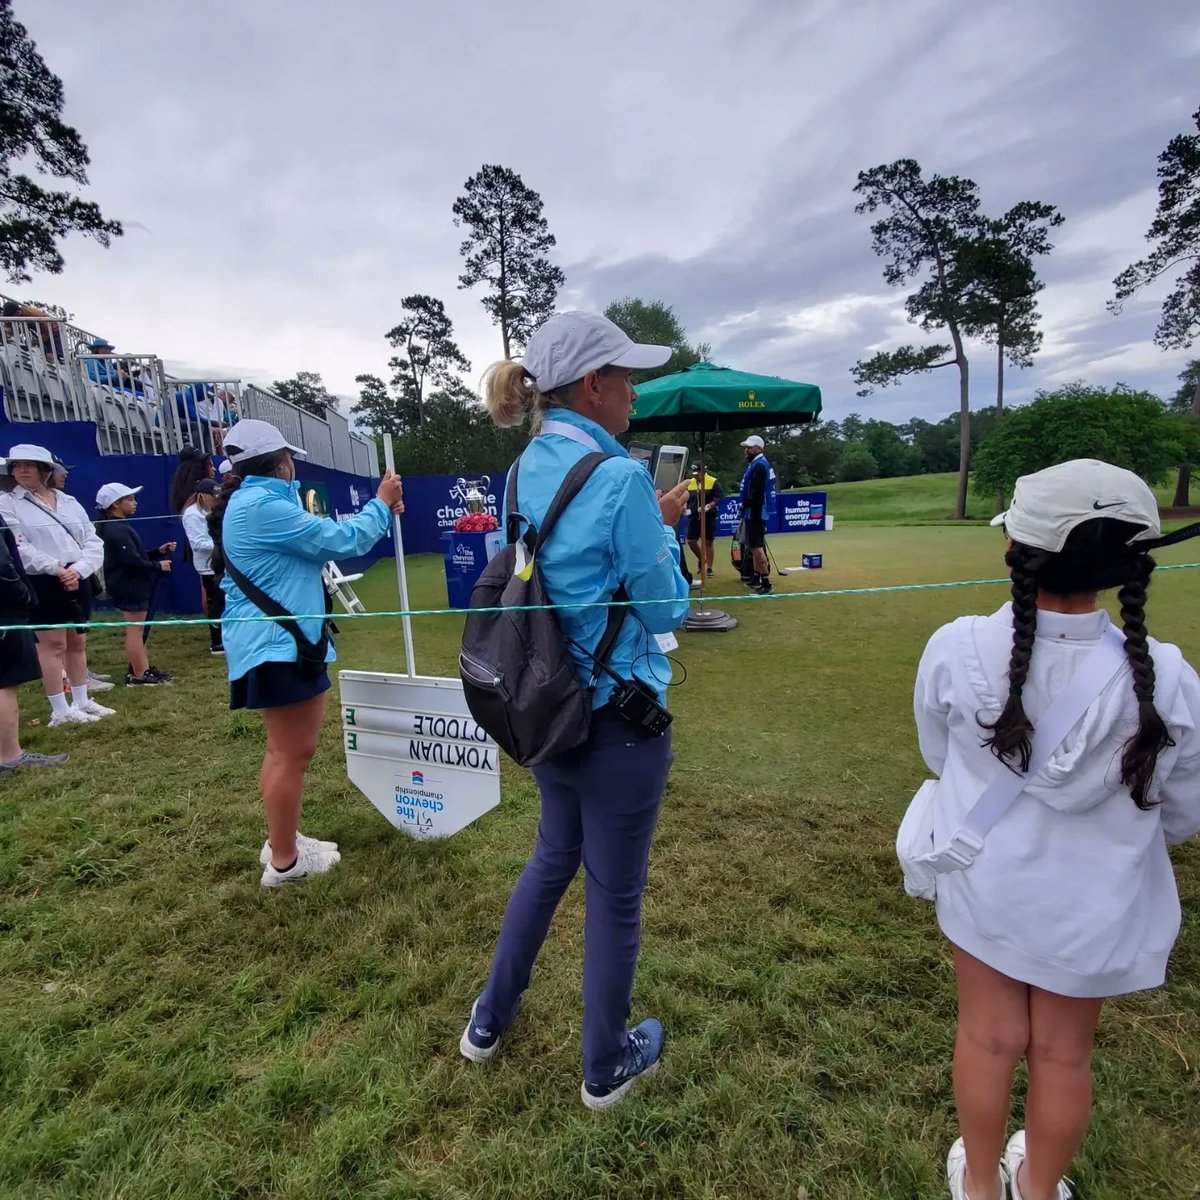 I volunteered @LPGA @Chevron_Golf this past weekend and I enjoyed every minute of it and will never forget this amazing experience with @ryannotoole and @parinprinp. I learned alot and will use this to better my game.⛳️🏌‍♀️

#thechevronchampionship #thestarsarebright ✨️